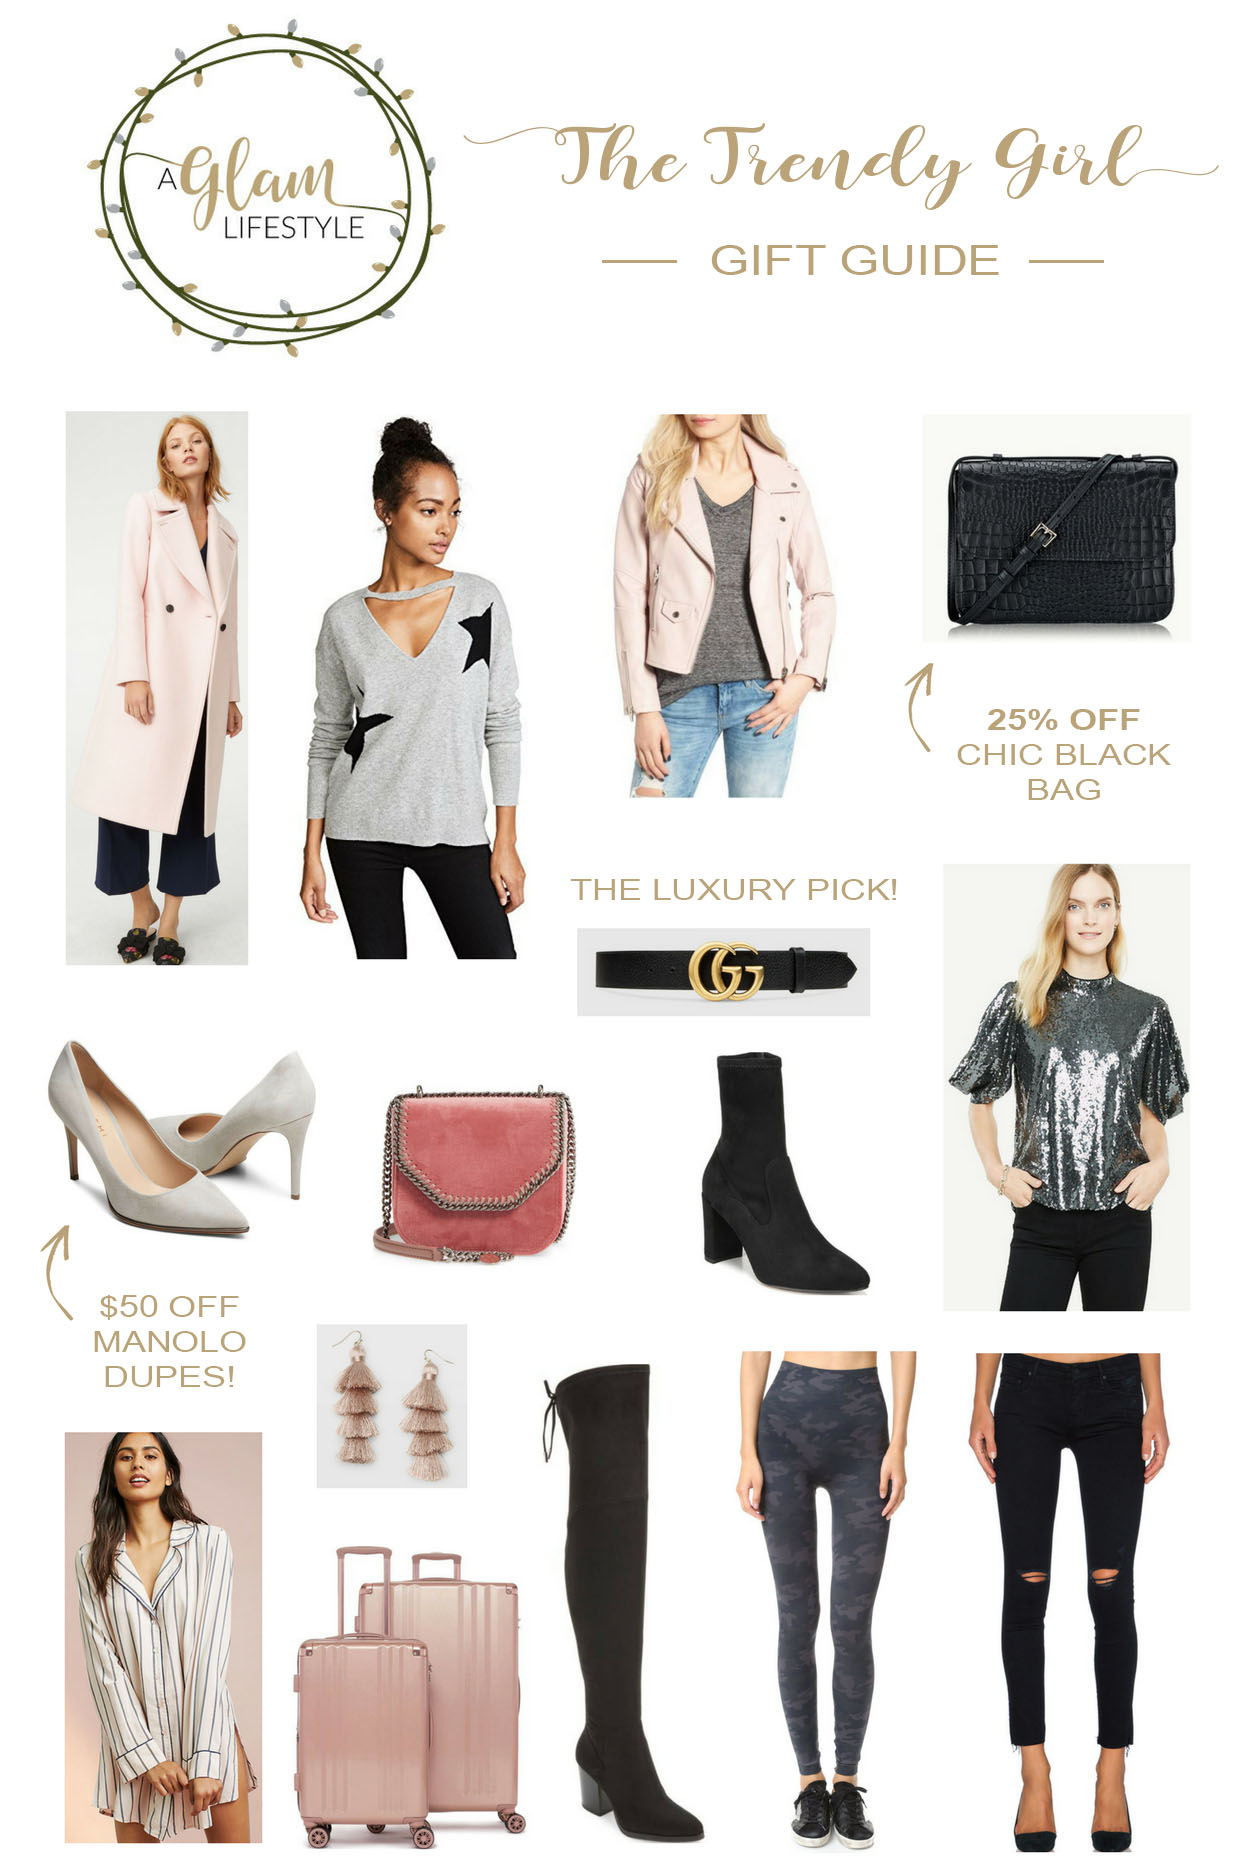 Trendy Girl Gift Guide for the fashionista in your life as curated by South Florida fashion blogger Amanda of A Glam Lifestyle